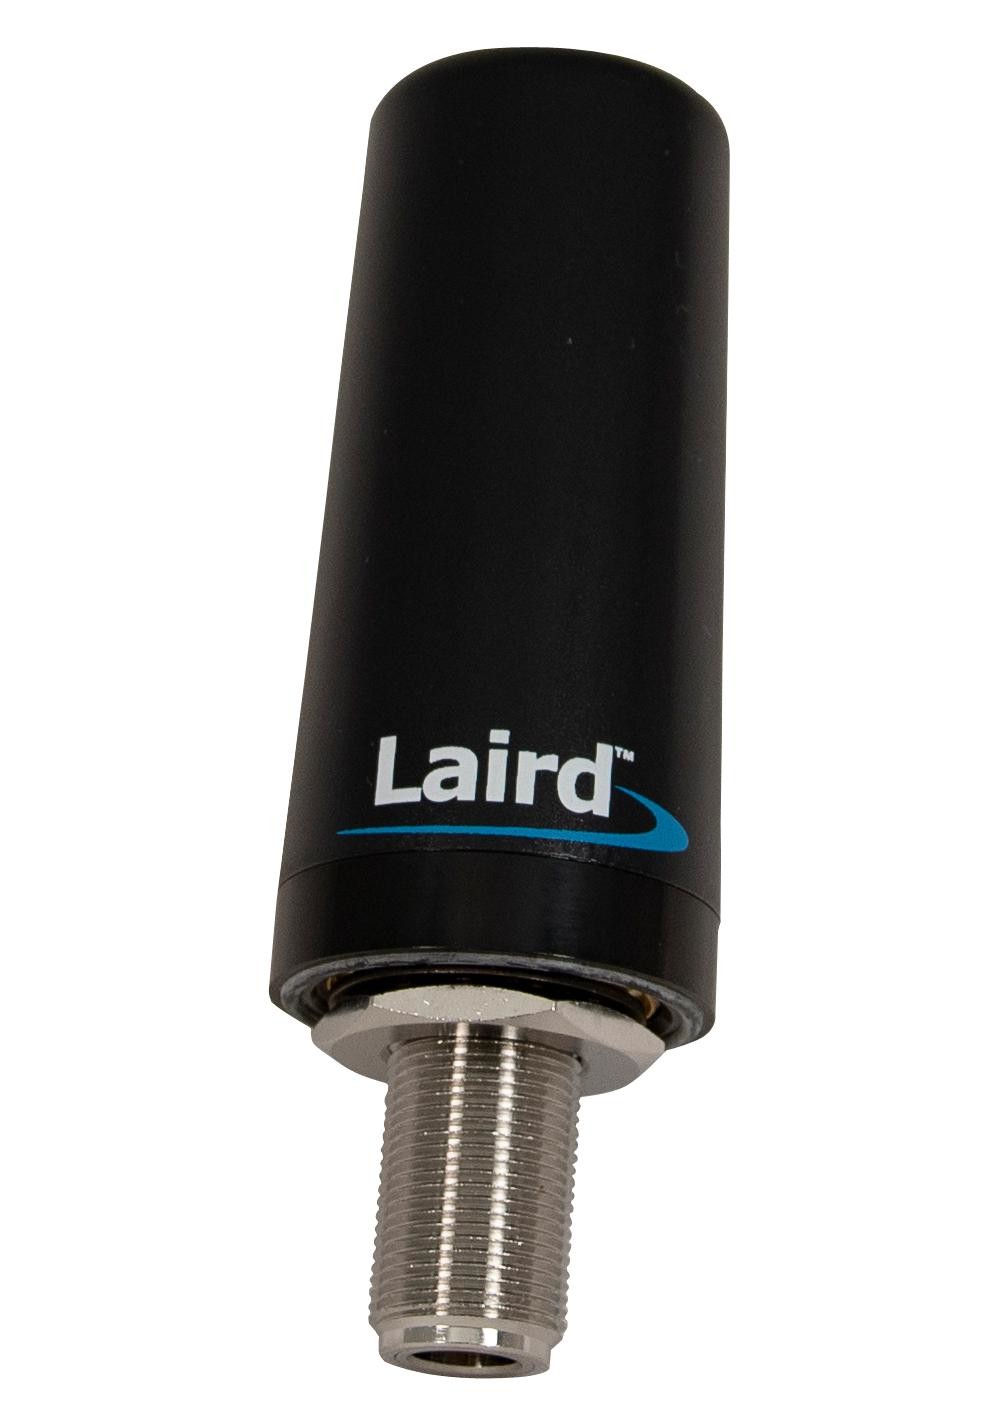 Laird Connectivity Tra6927M3Pb-001 Dome Antenna, 1.71-2.7Ghz, 4.6Dbi